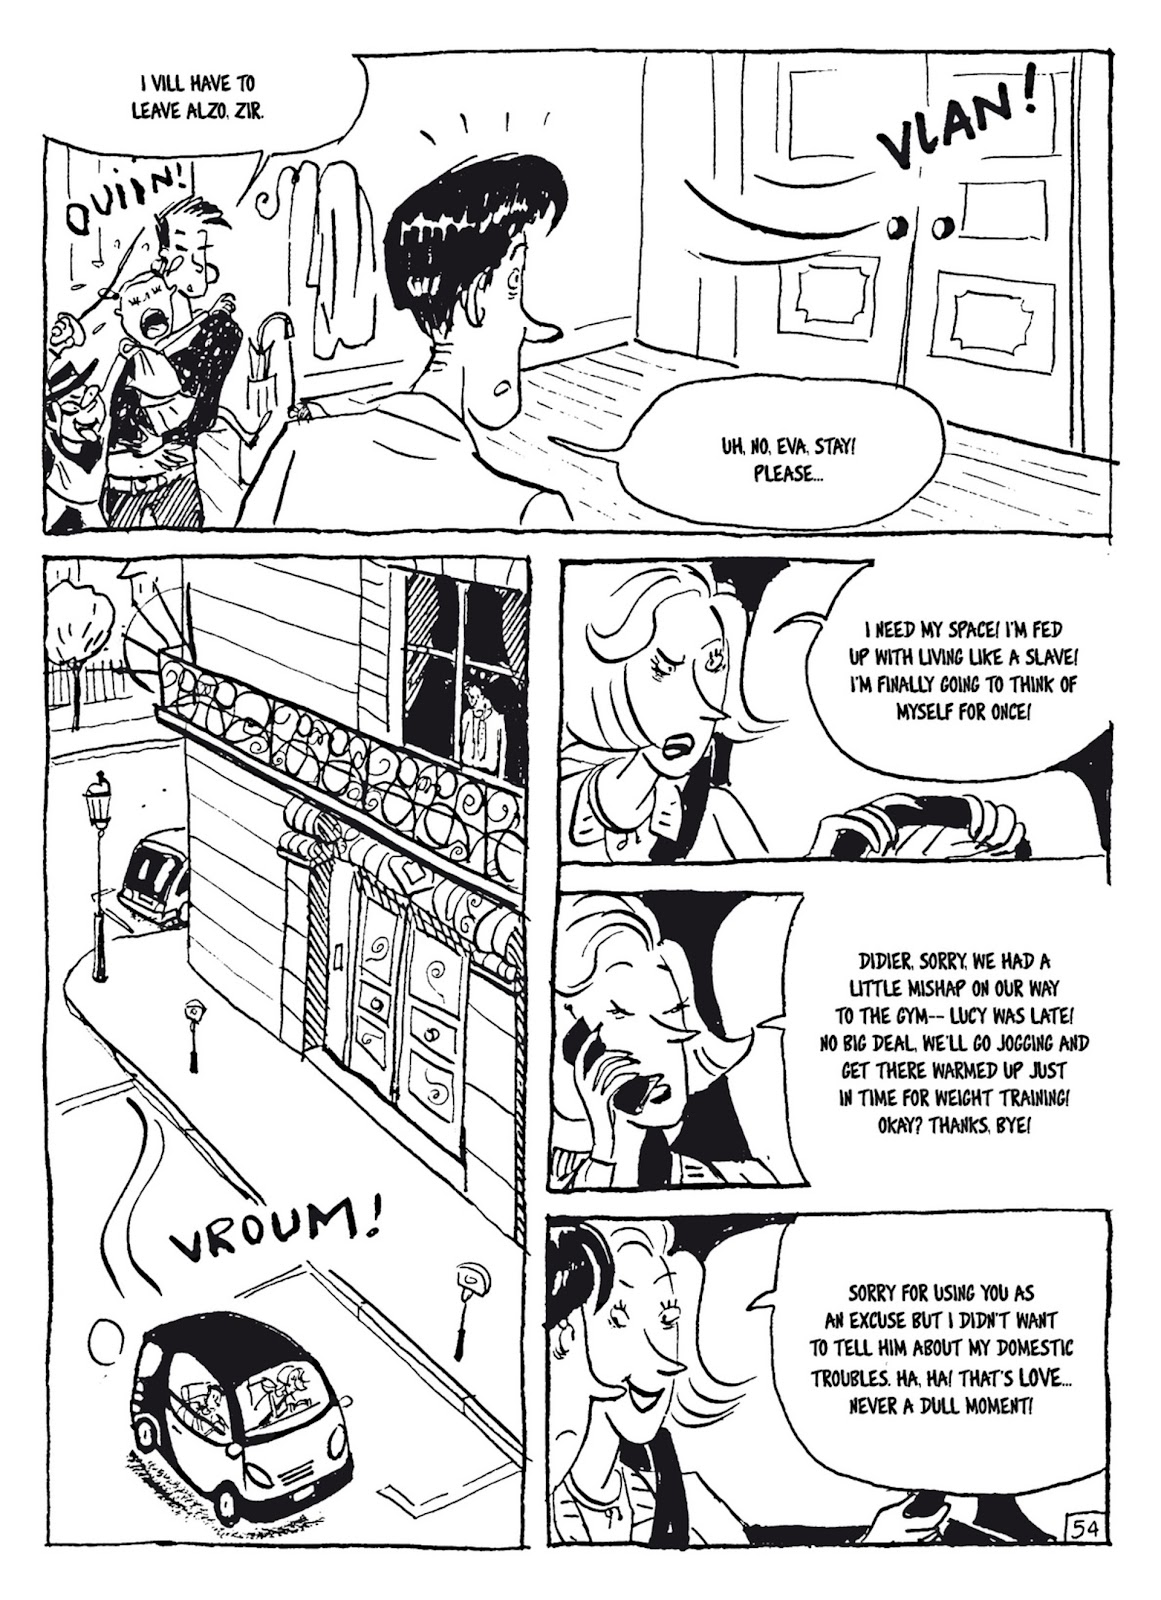 Bluesy Lucy - The Existential Chronicles of a Thirtysomething issue 2 - Page 9